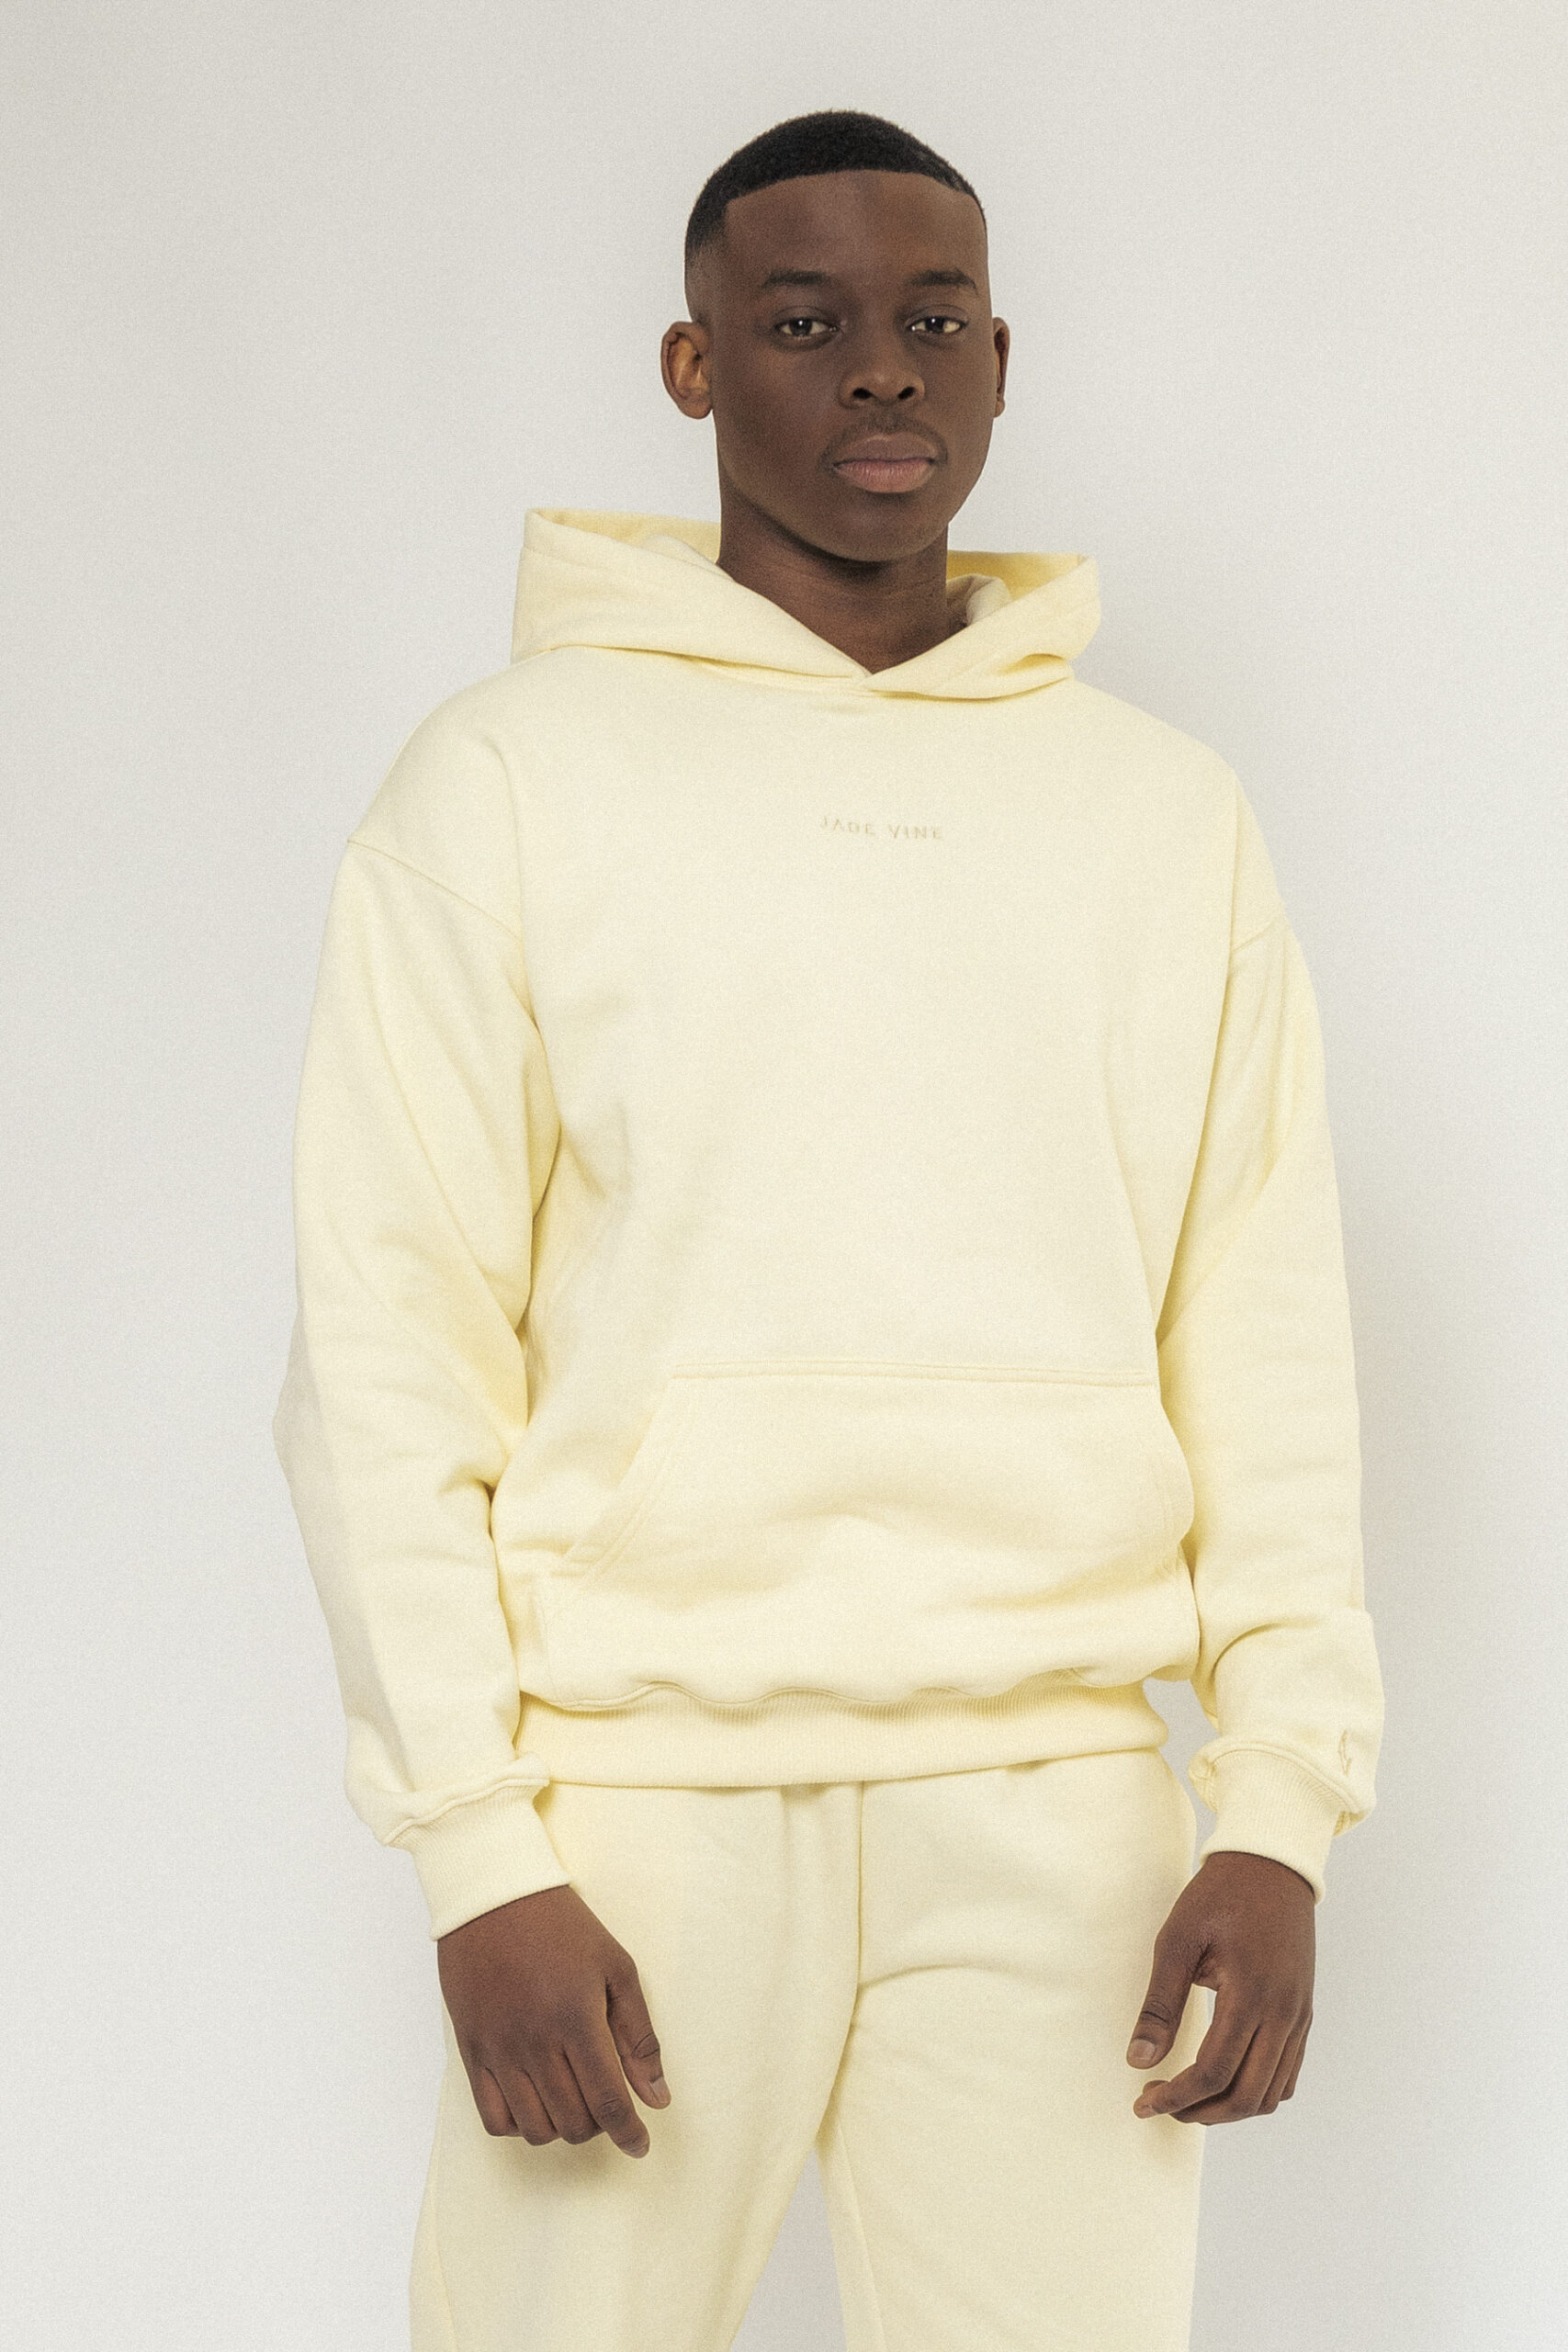 HOODIE PALE – EMBROIDERY Cravoclothing VINE JADE LOGO YELLOW